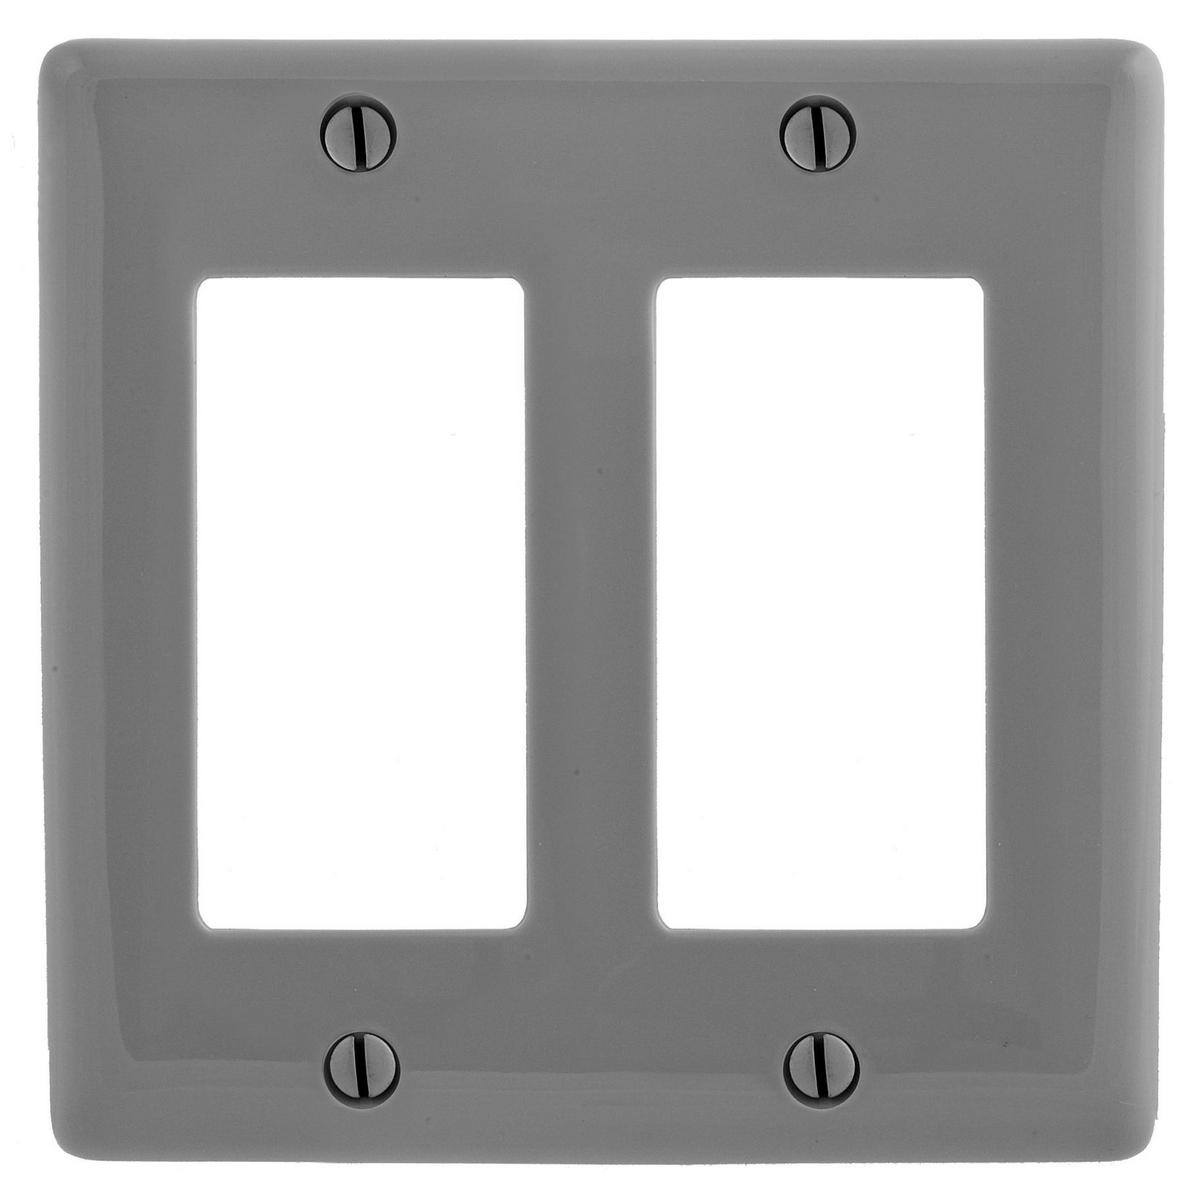 Hubbell NP262GY Wallplates and Box Covers, Wallplate, Nylon, 2-Gang, 2) Decorator, Gray  ; Reinforcement ribs for extra strength ; Captive screw feature holds mounting screw in place ; High-impact, self-extinguishing nylon material ; Standard Size is 1/8" larger to give 